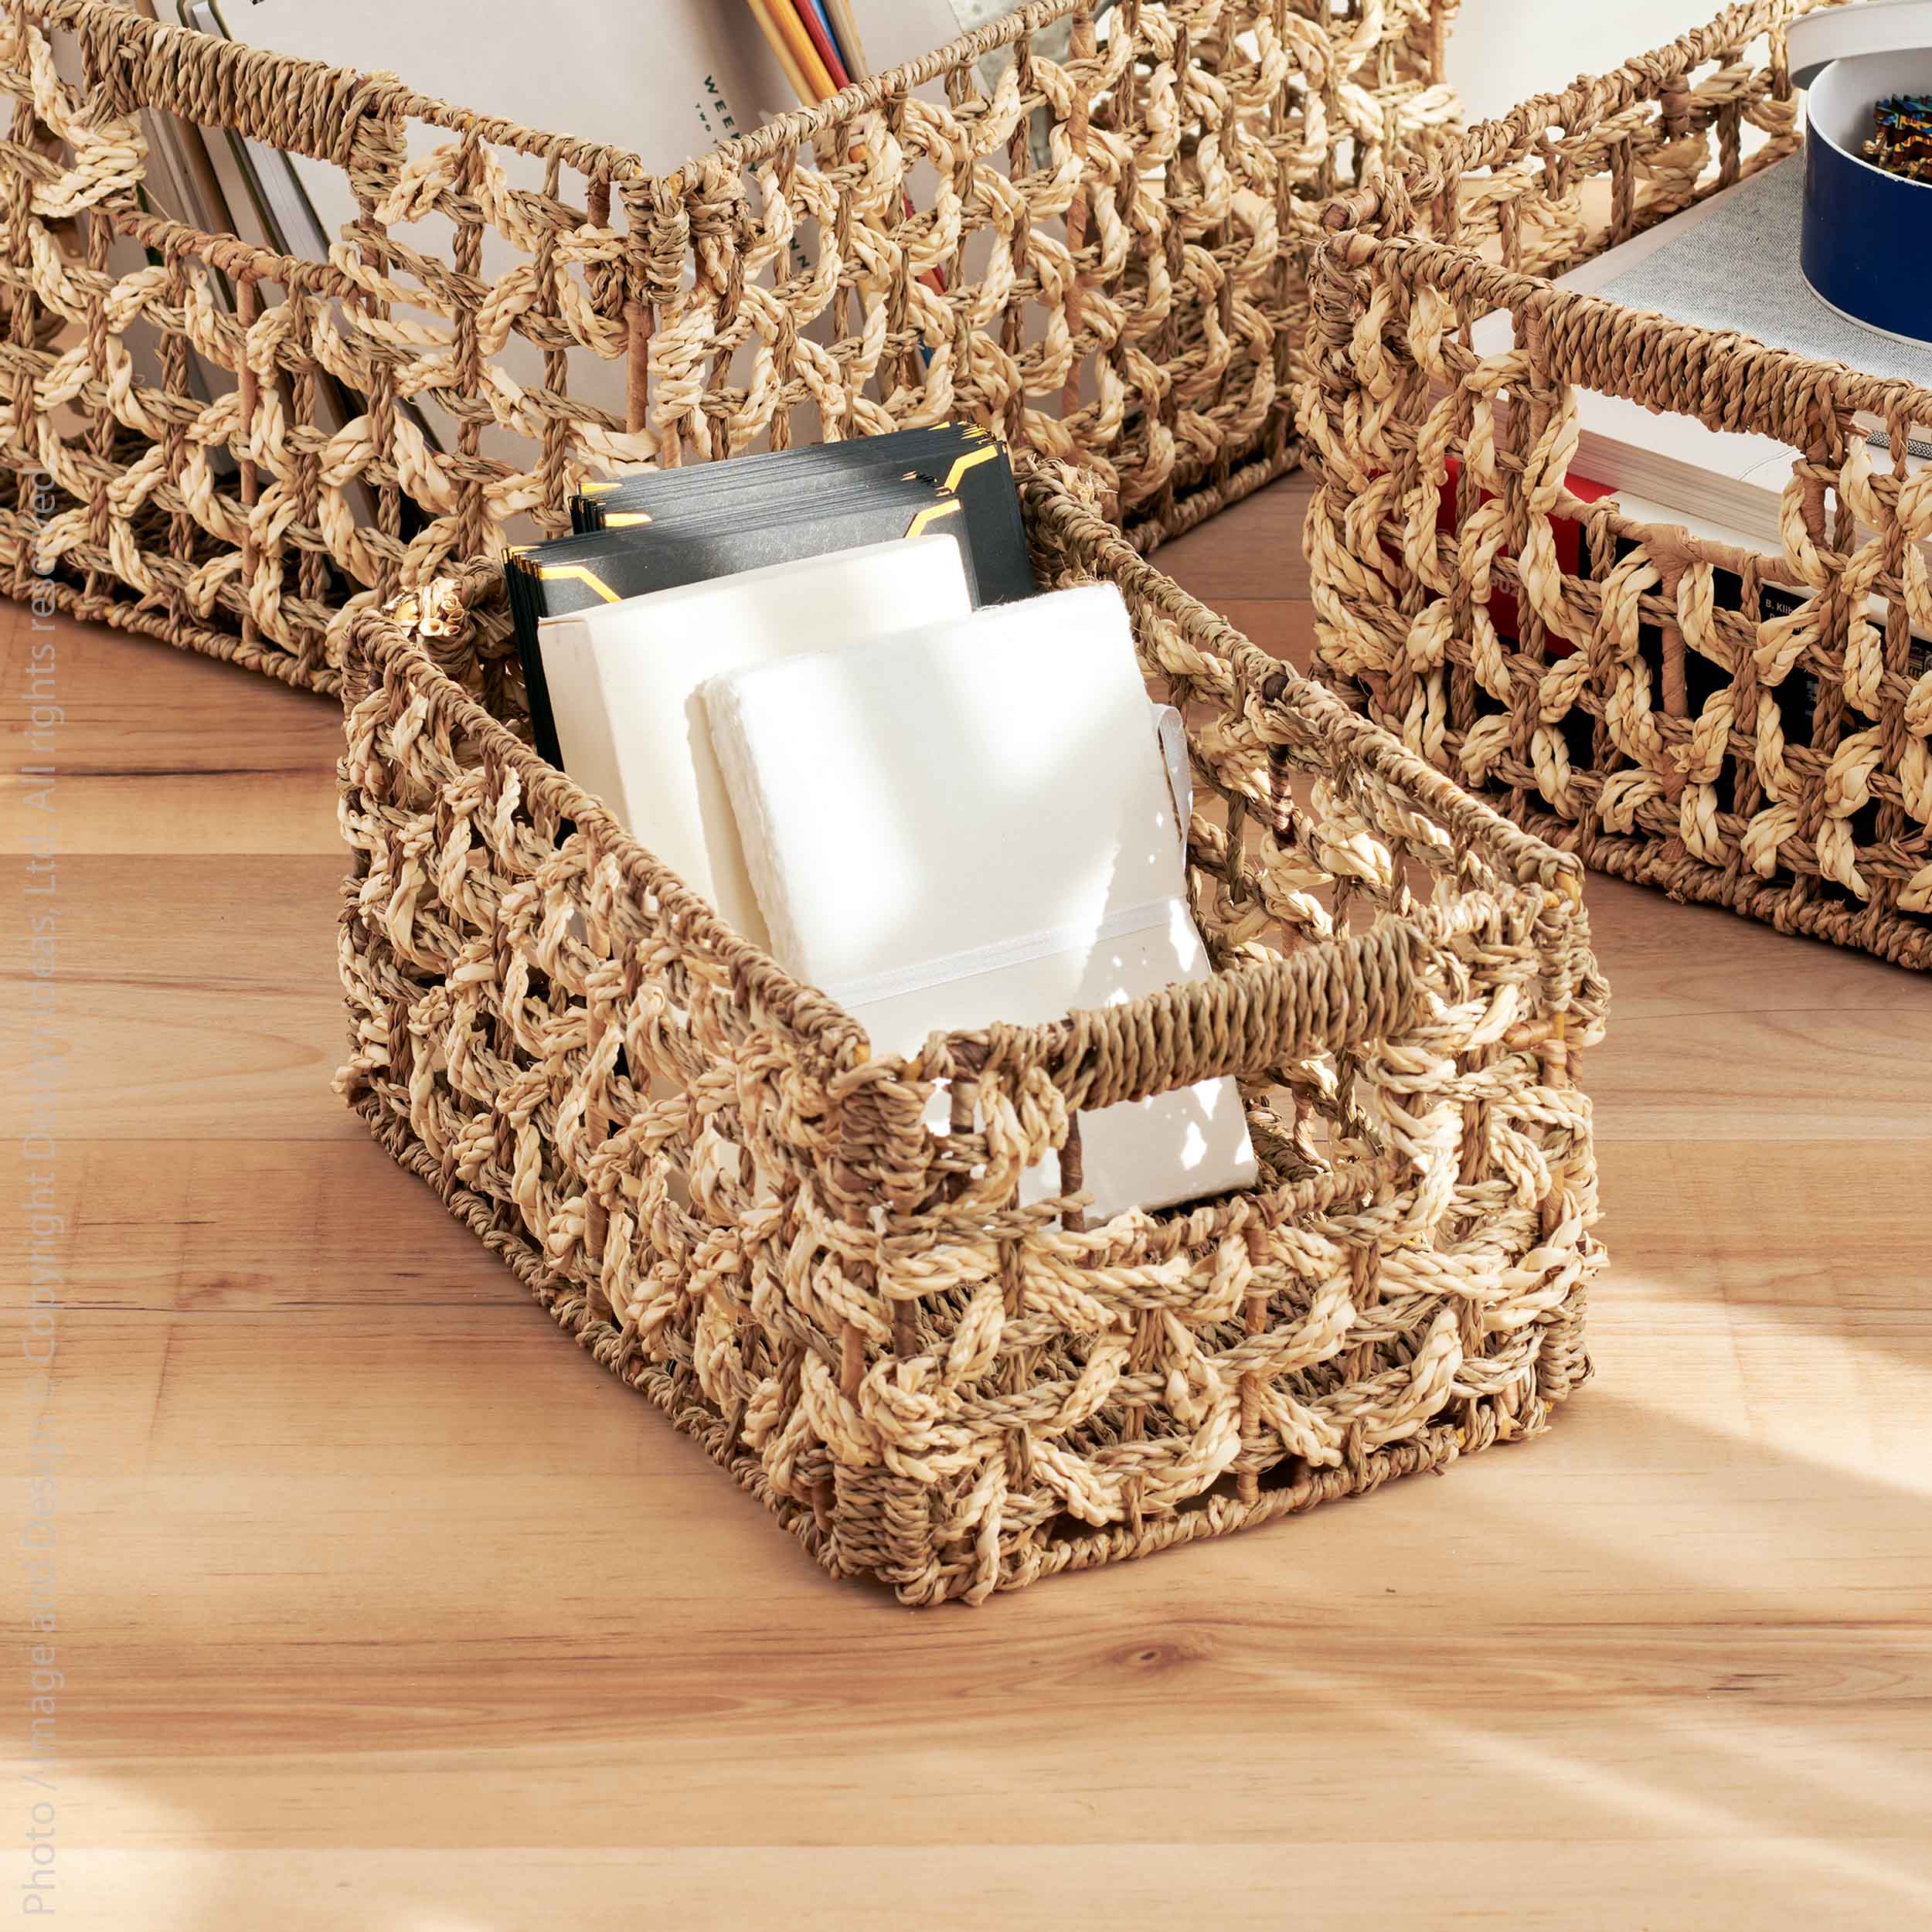 Mensch™ Small Hand Woven Palm and Seagrass Basket (7.9 x 11.8 x 6.3 in) - (colors: Natural) | Premium Basket from the Mensch™ collection | made with Palm and Seagrass for long lasting use